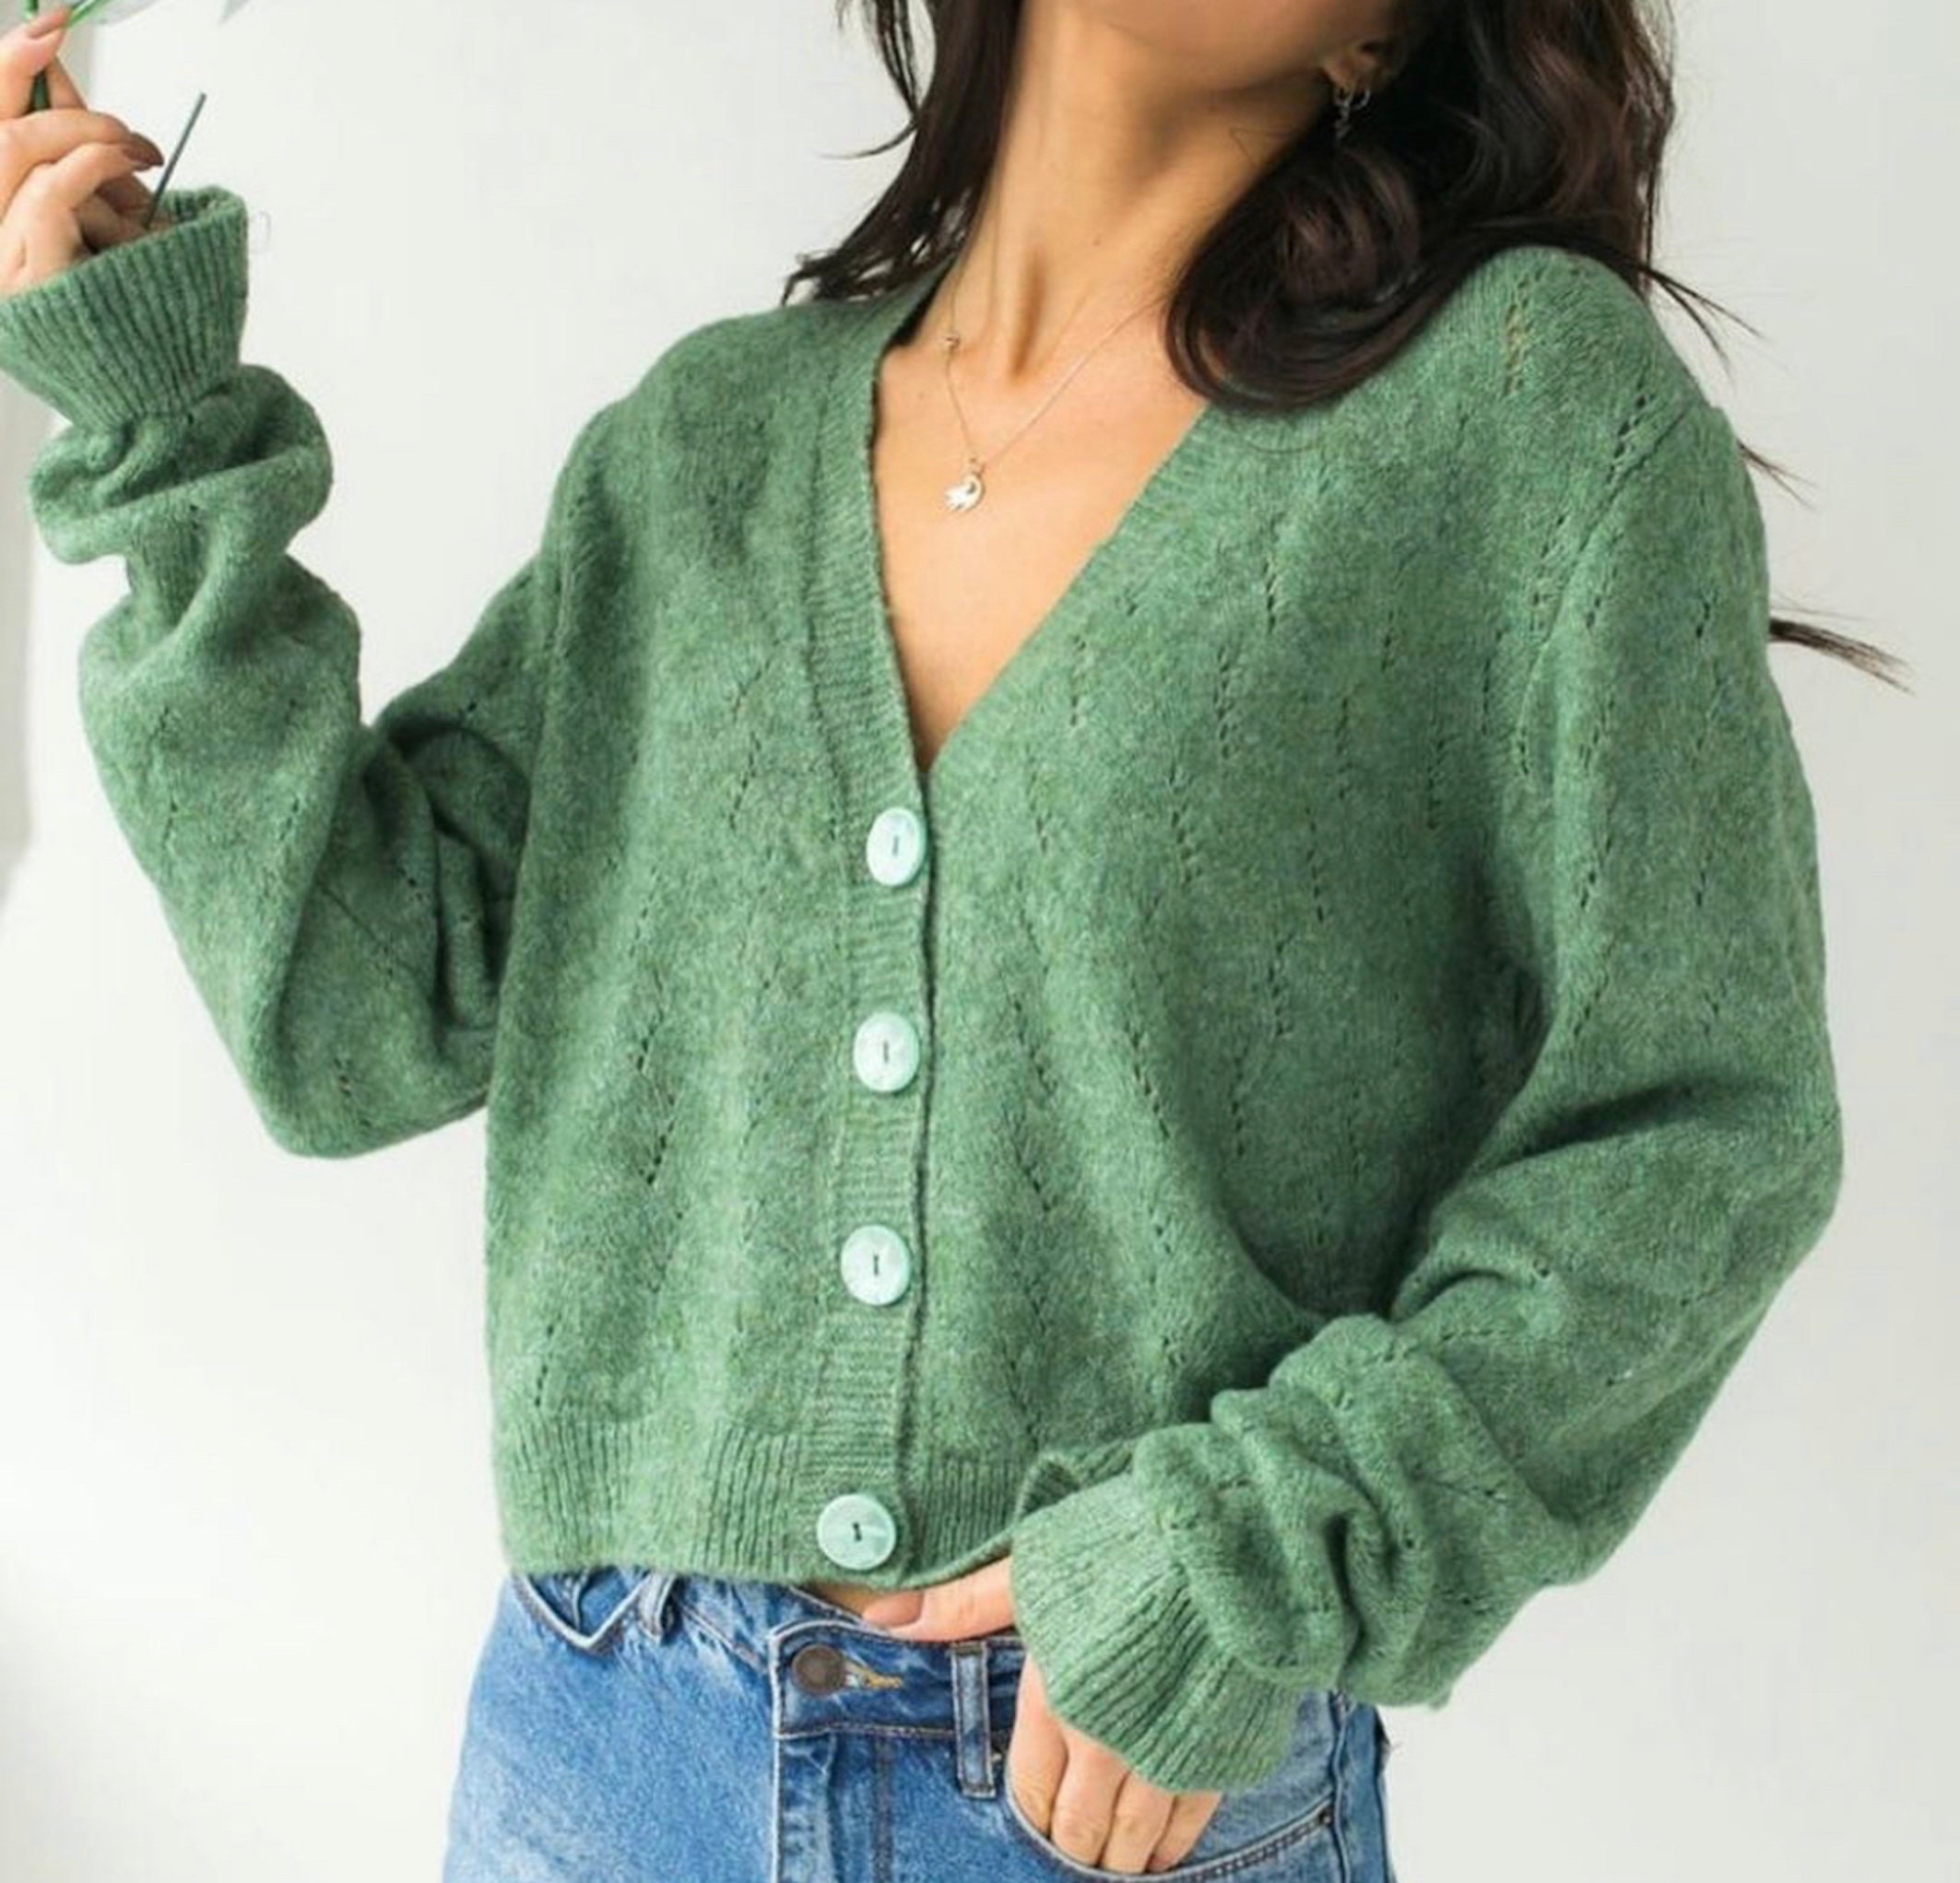 Green Wool cardigan for women V-neck Sweater cardigan for | Etsy